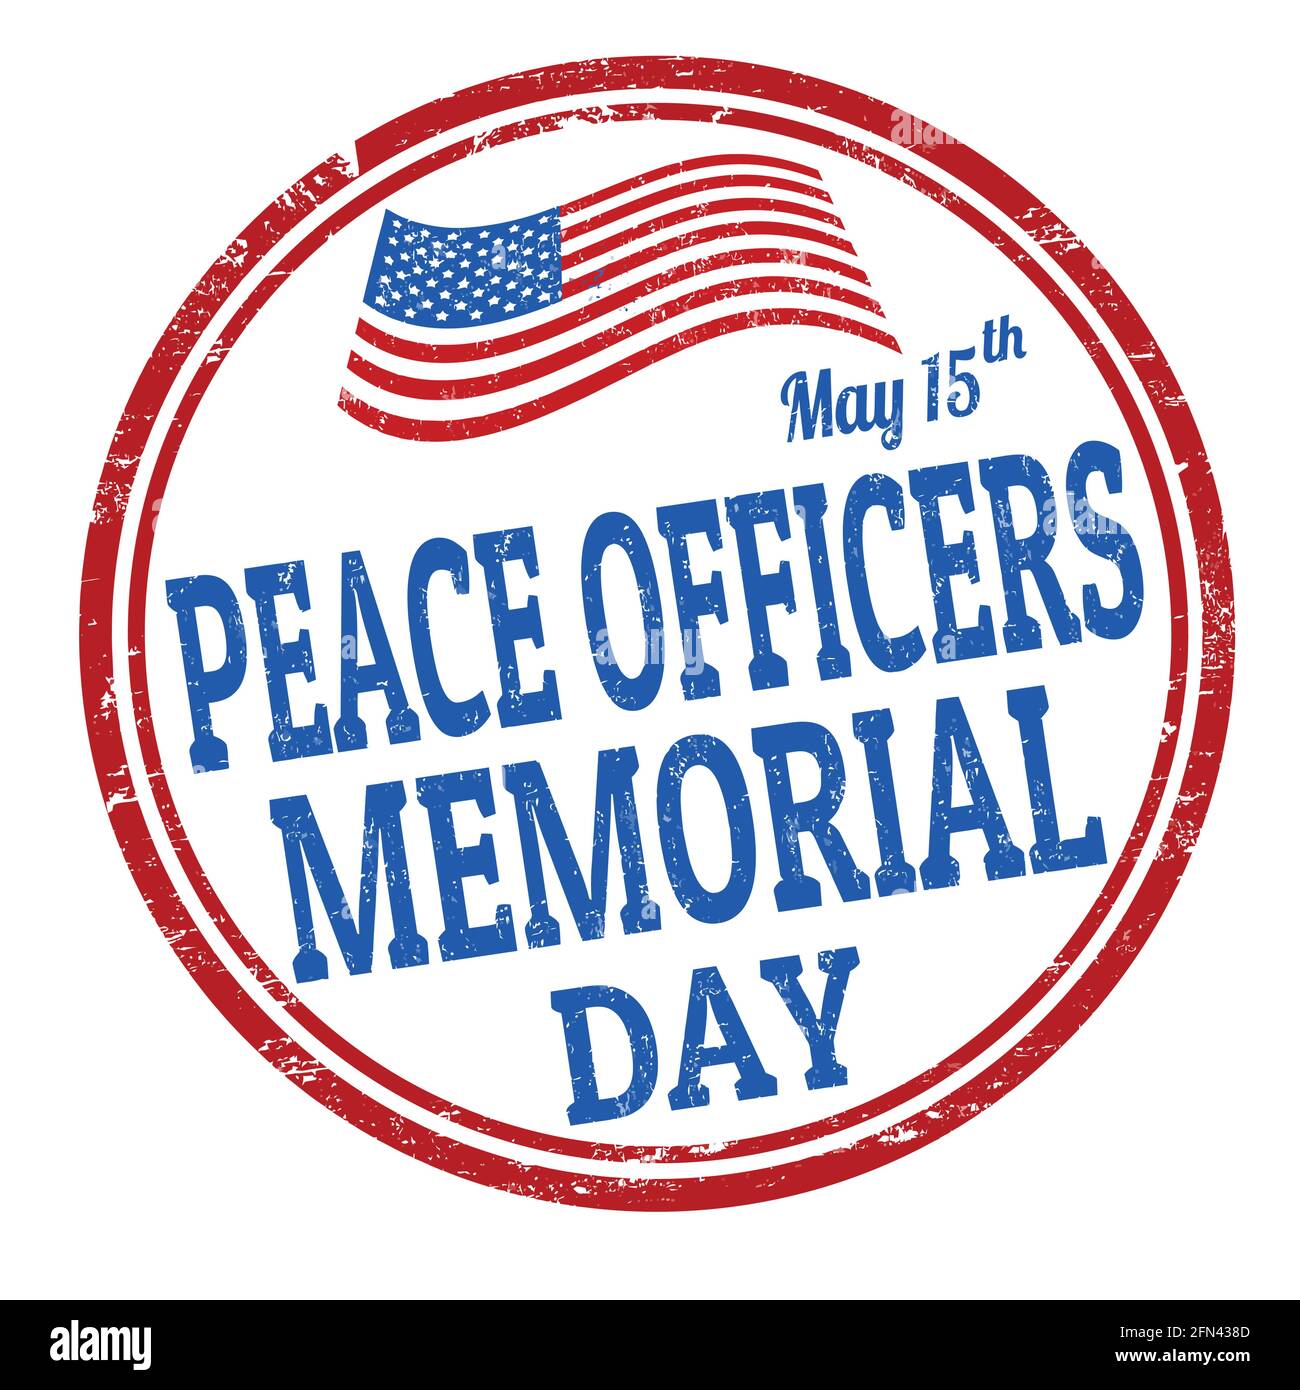 Peace officers memorial day grunge rubber stamp on white background, vector illustration Stock Vector